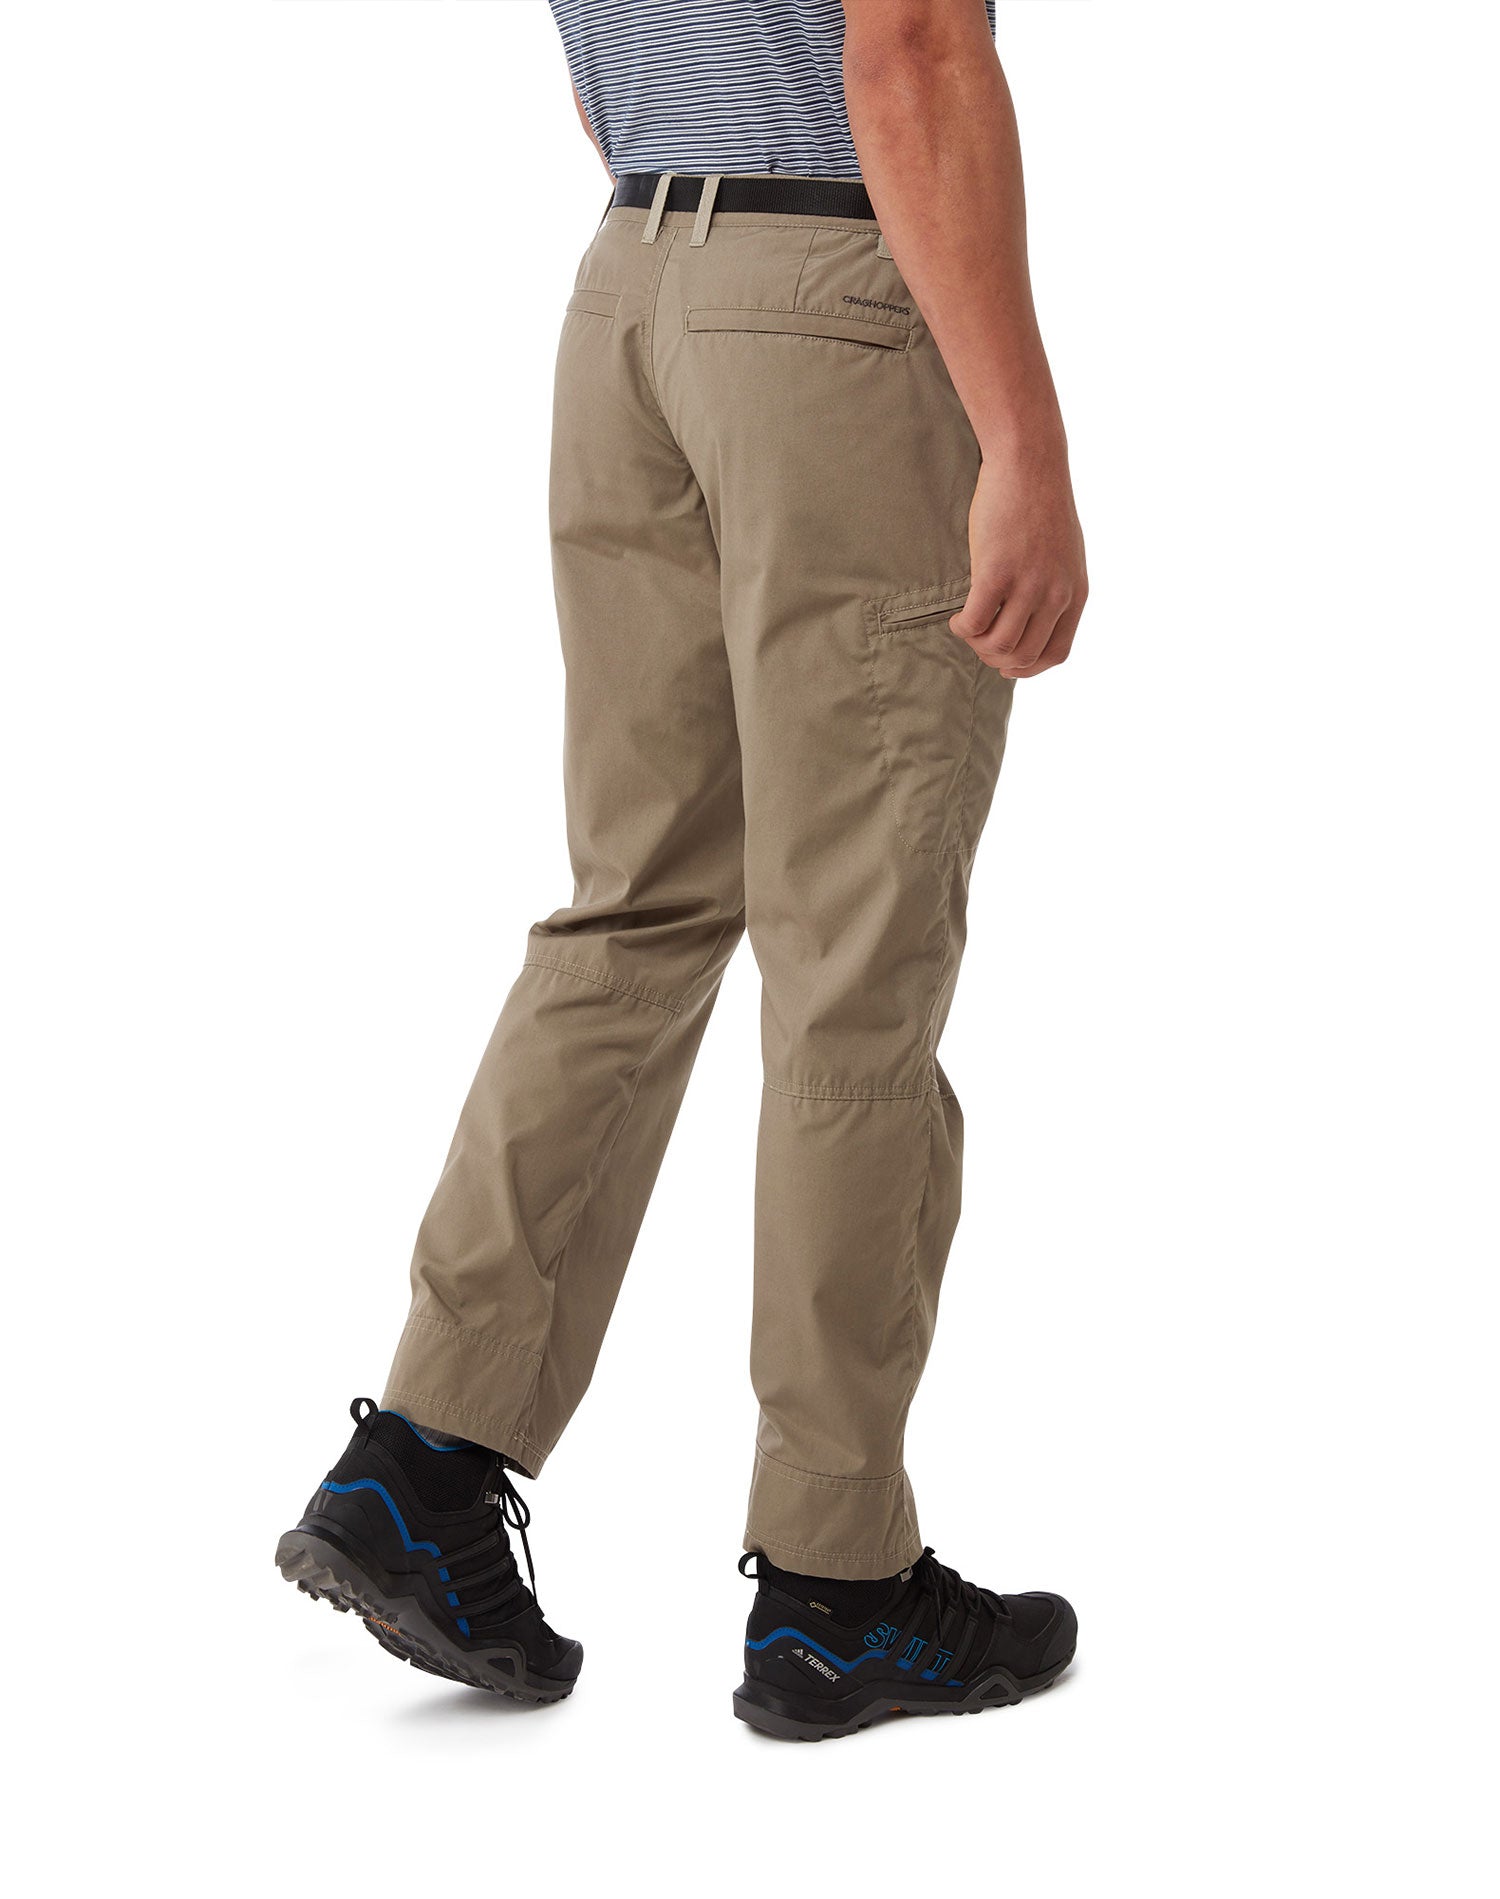 Craghoppers Kiwi Boulder Trousers in Pebble